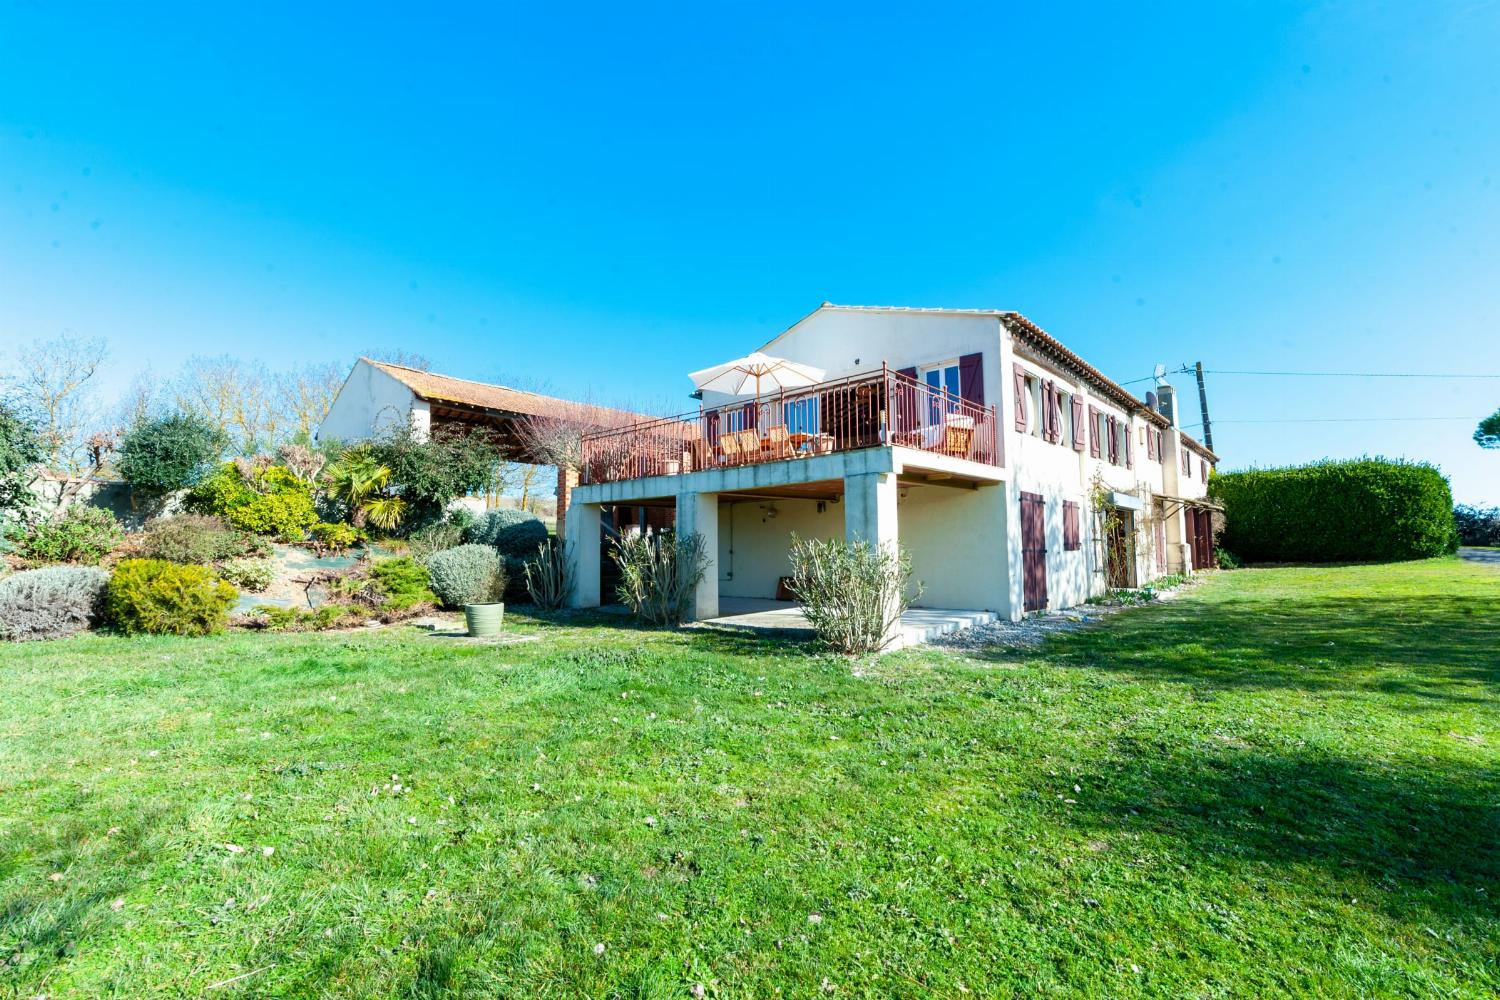 Rental home in South of France